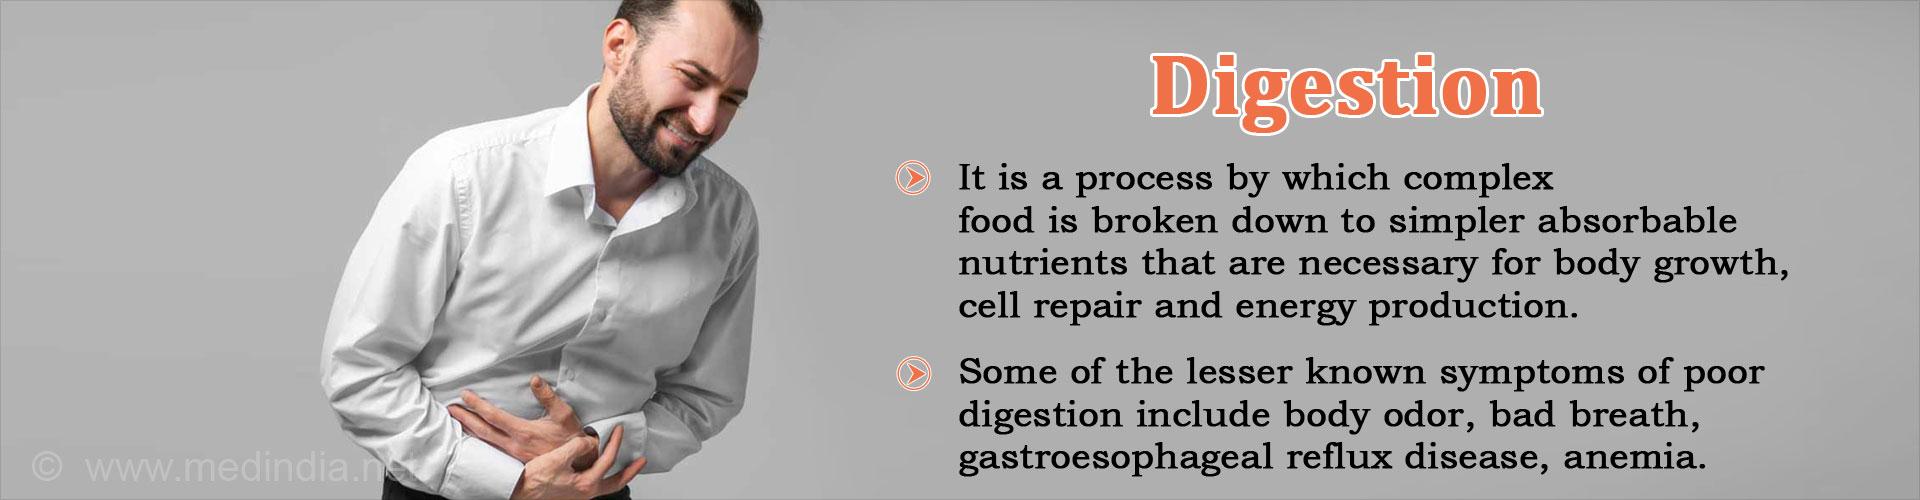 Digestion
- It is a process by which complex food is broken down to simpler absorbable nutrients that are necessary for body growth, cell repair and energy production
- Some of the lesser known symptoms of poor digestion include body odor, bad breath, gastroesphageal reflux disease, anemia
